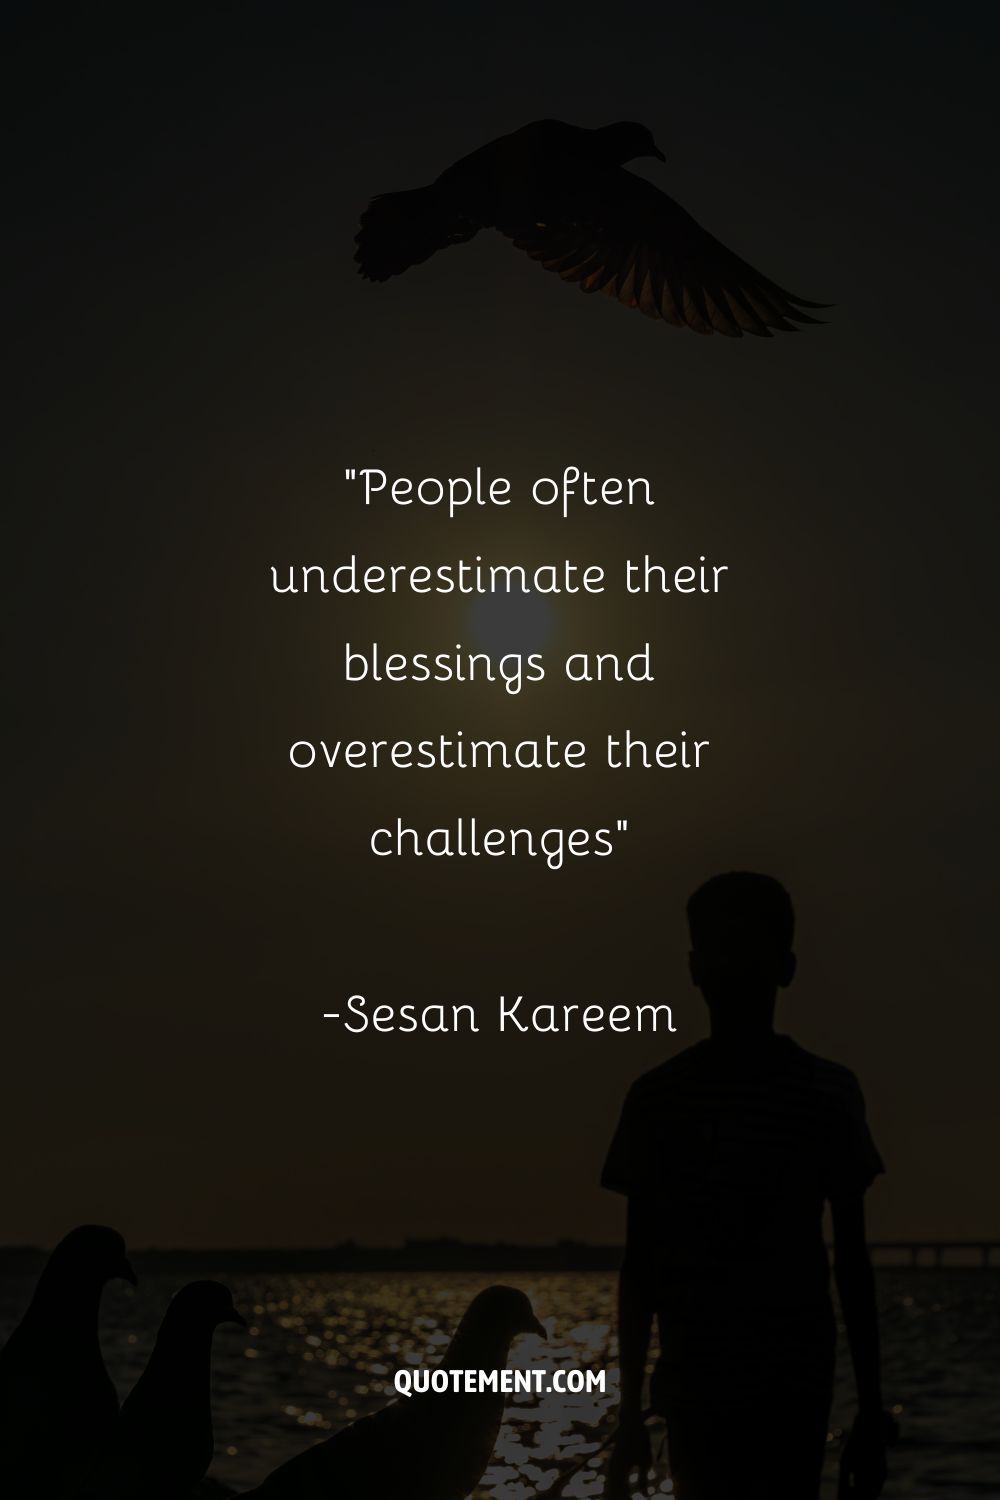 “People often underestimate their blessings and overestimate their challenges”